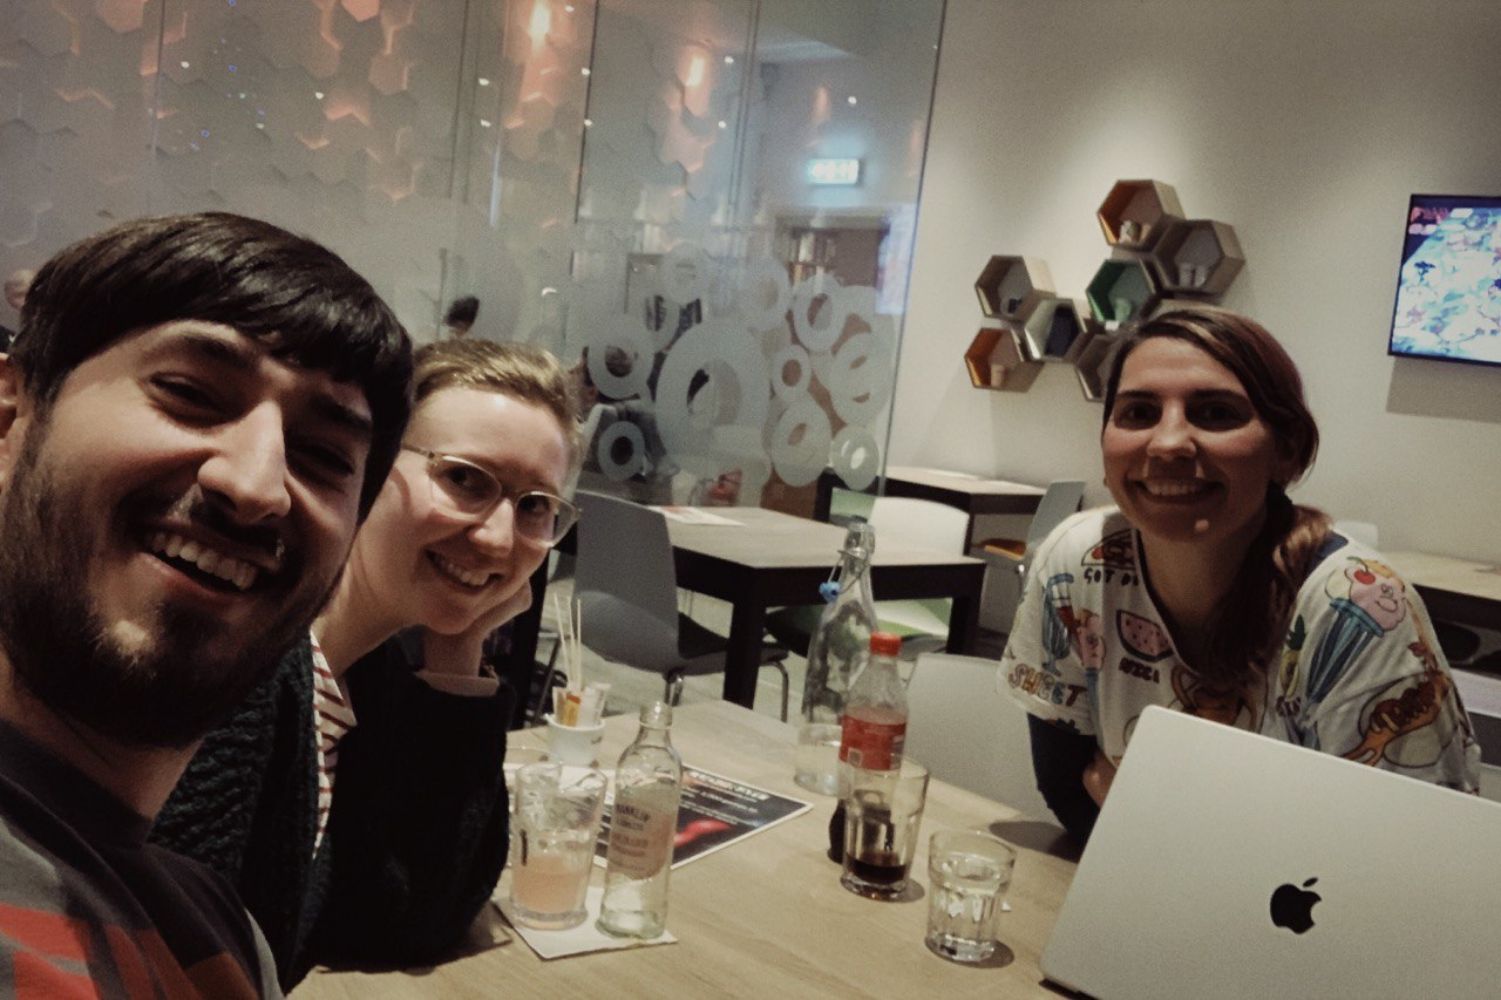 Photo of Jamie, Anna and Carol in person at Ludorati board game cafe, smiling at the camera